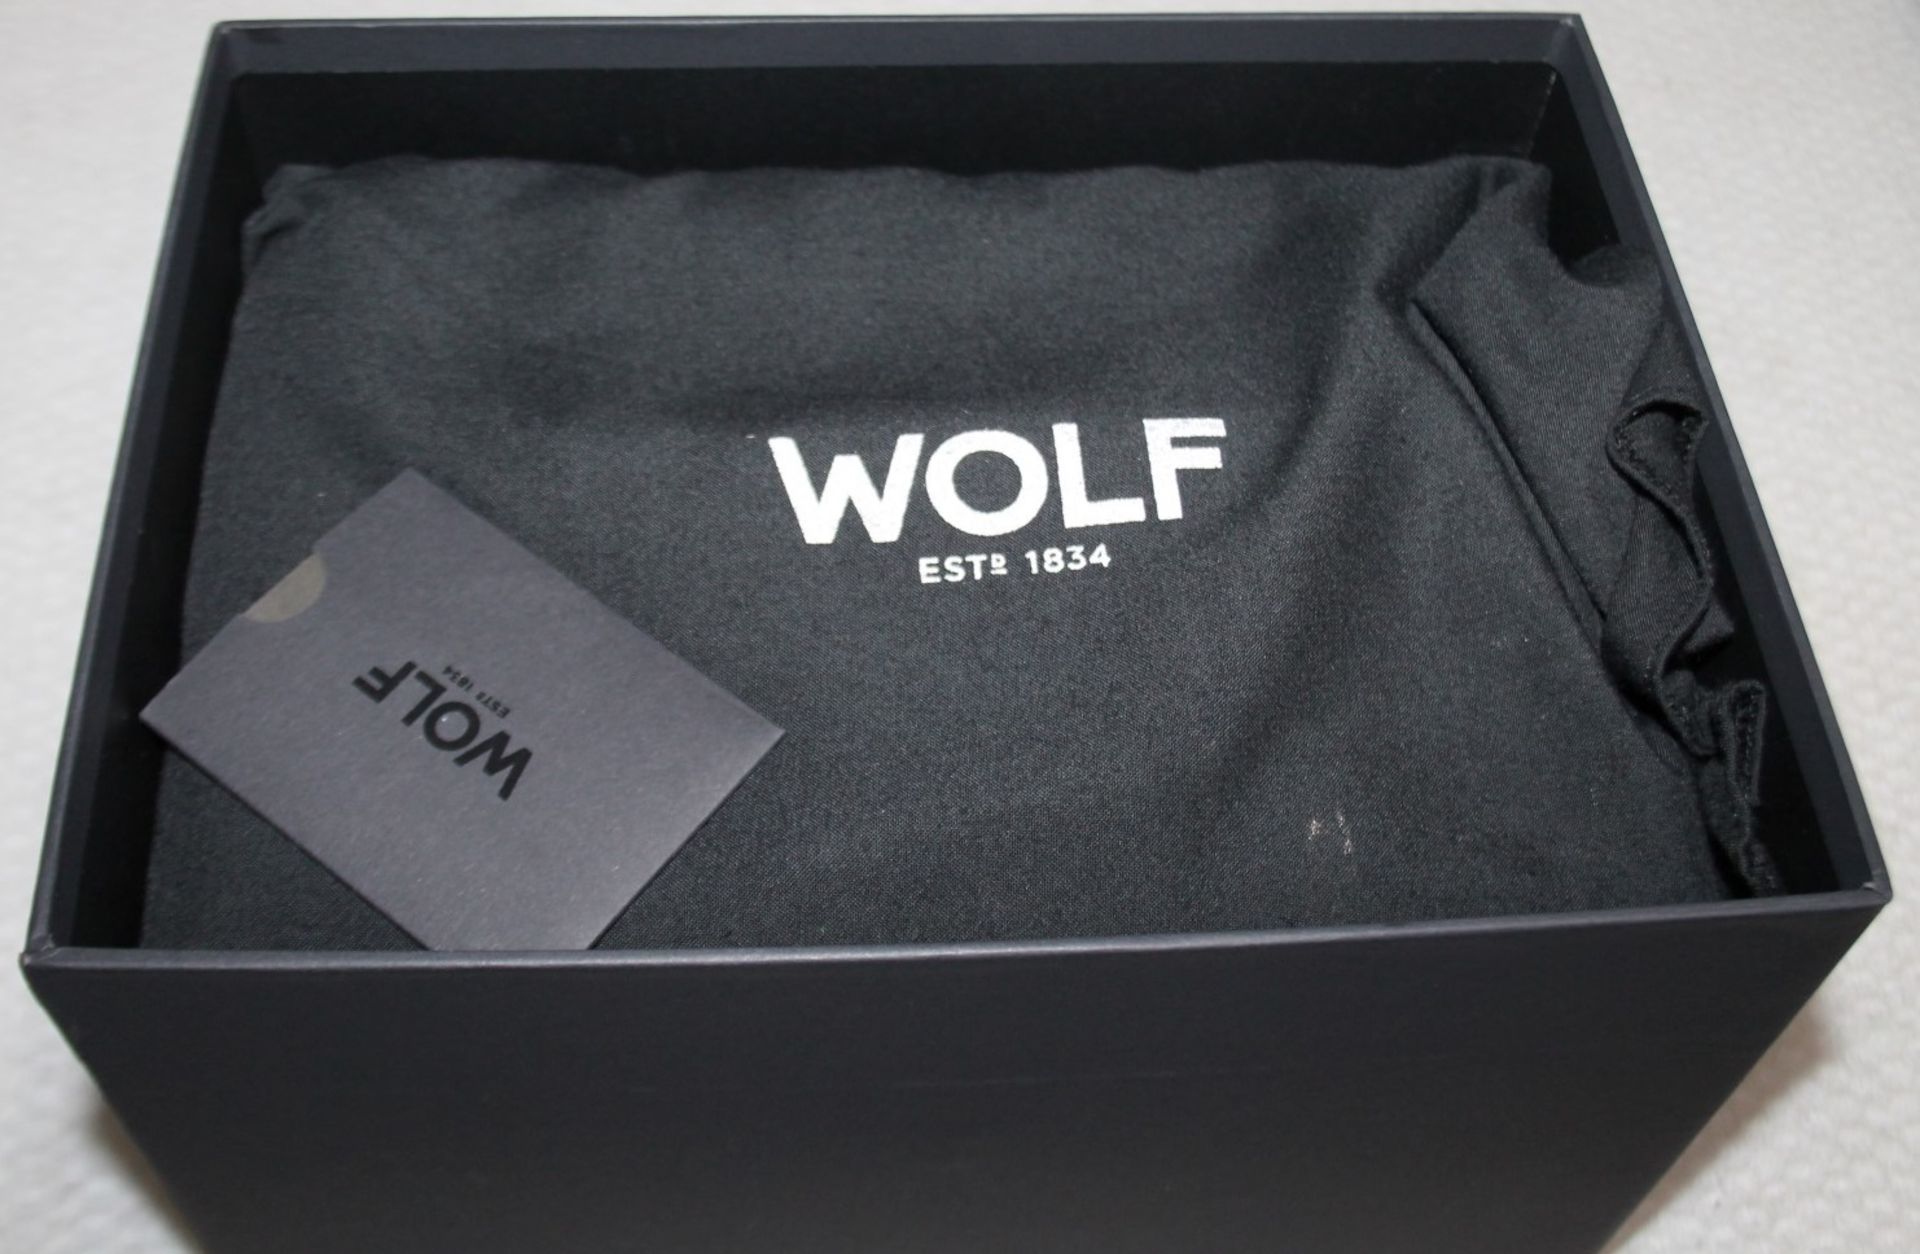 1 x WOLF 'Caroline' Jewellery Box Handcrafted Black Leather, With Travel Case - Original Price £241 - Image 14 of 17